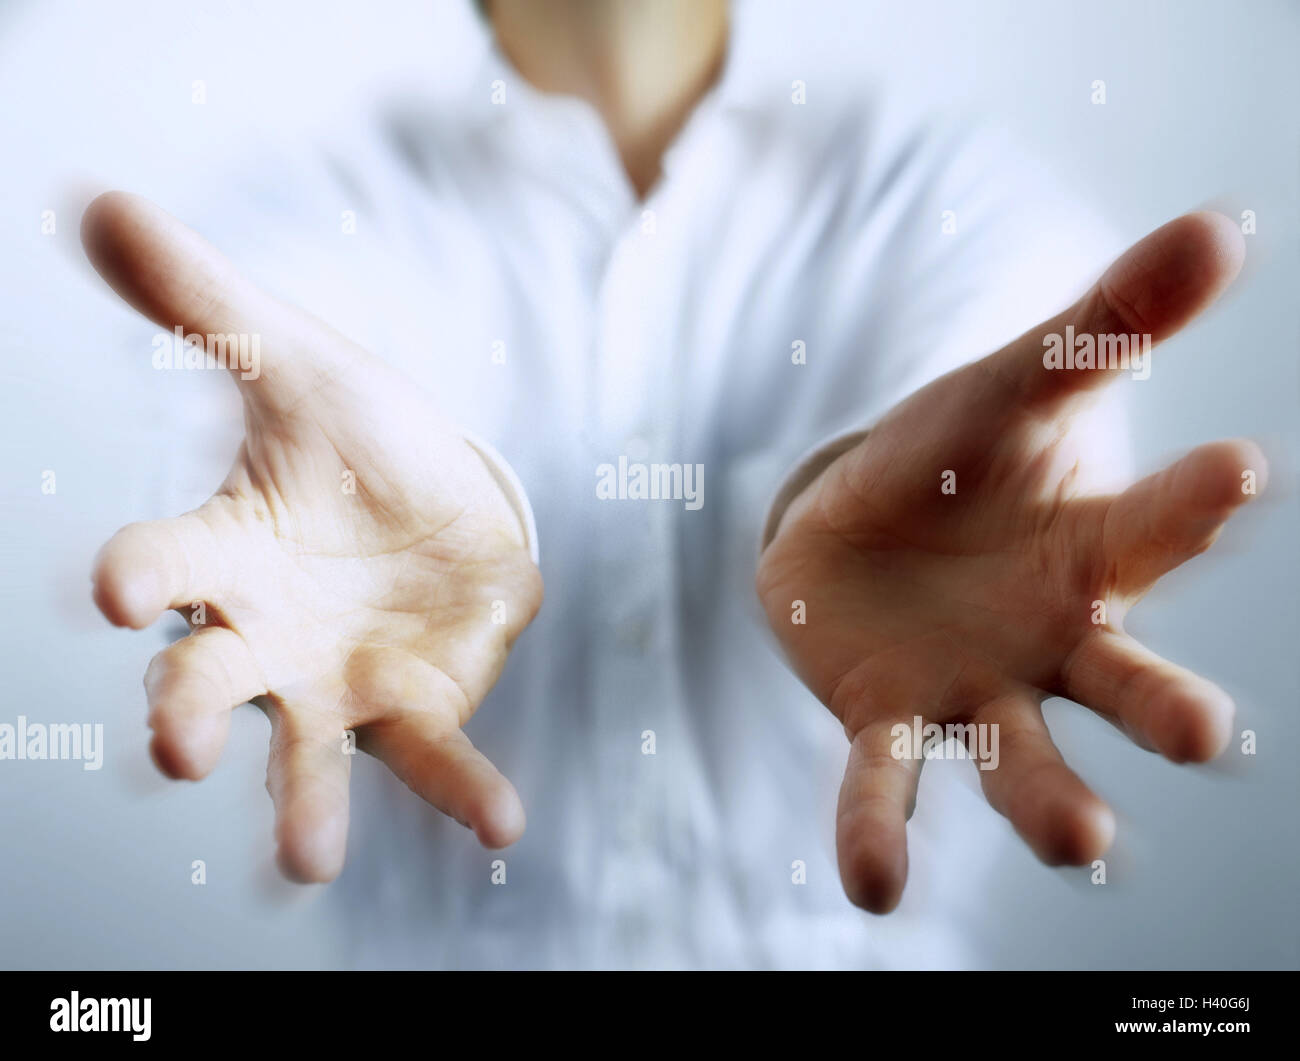 Person, gesture, arms, stretch, hands, accept, catch, model released, entgegenstrecken, expect, joy, expectation, hope, longing, desire, desperation, help searching, blur Stock Photo